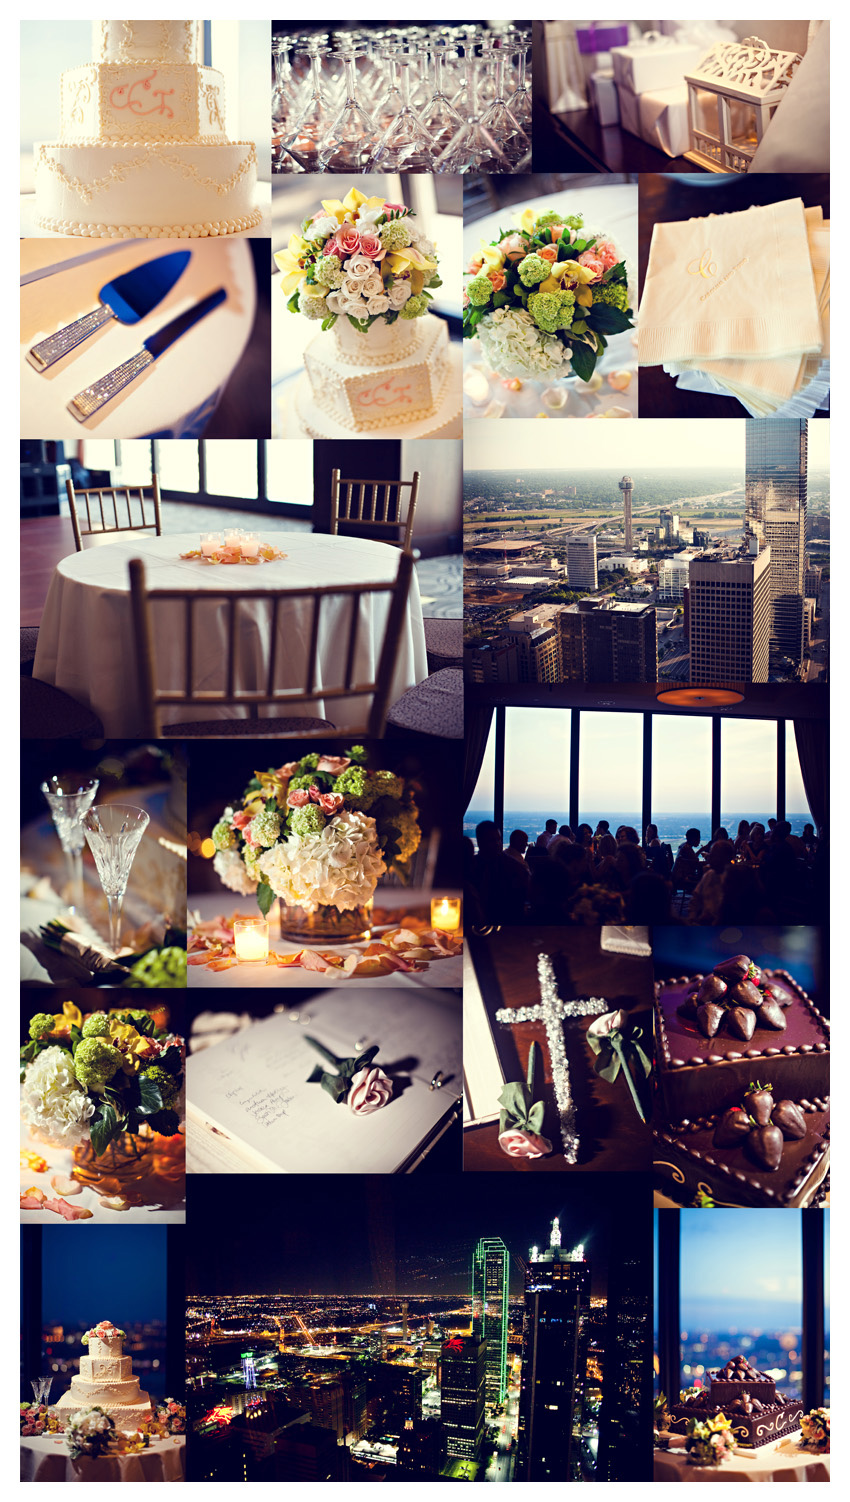 wedding of Caroline Boyd and Todd Cumbie at Tower Club by Dallas wedding photographer Stacy Reeves